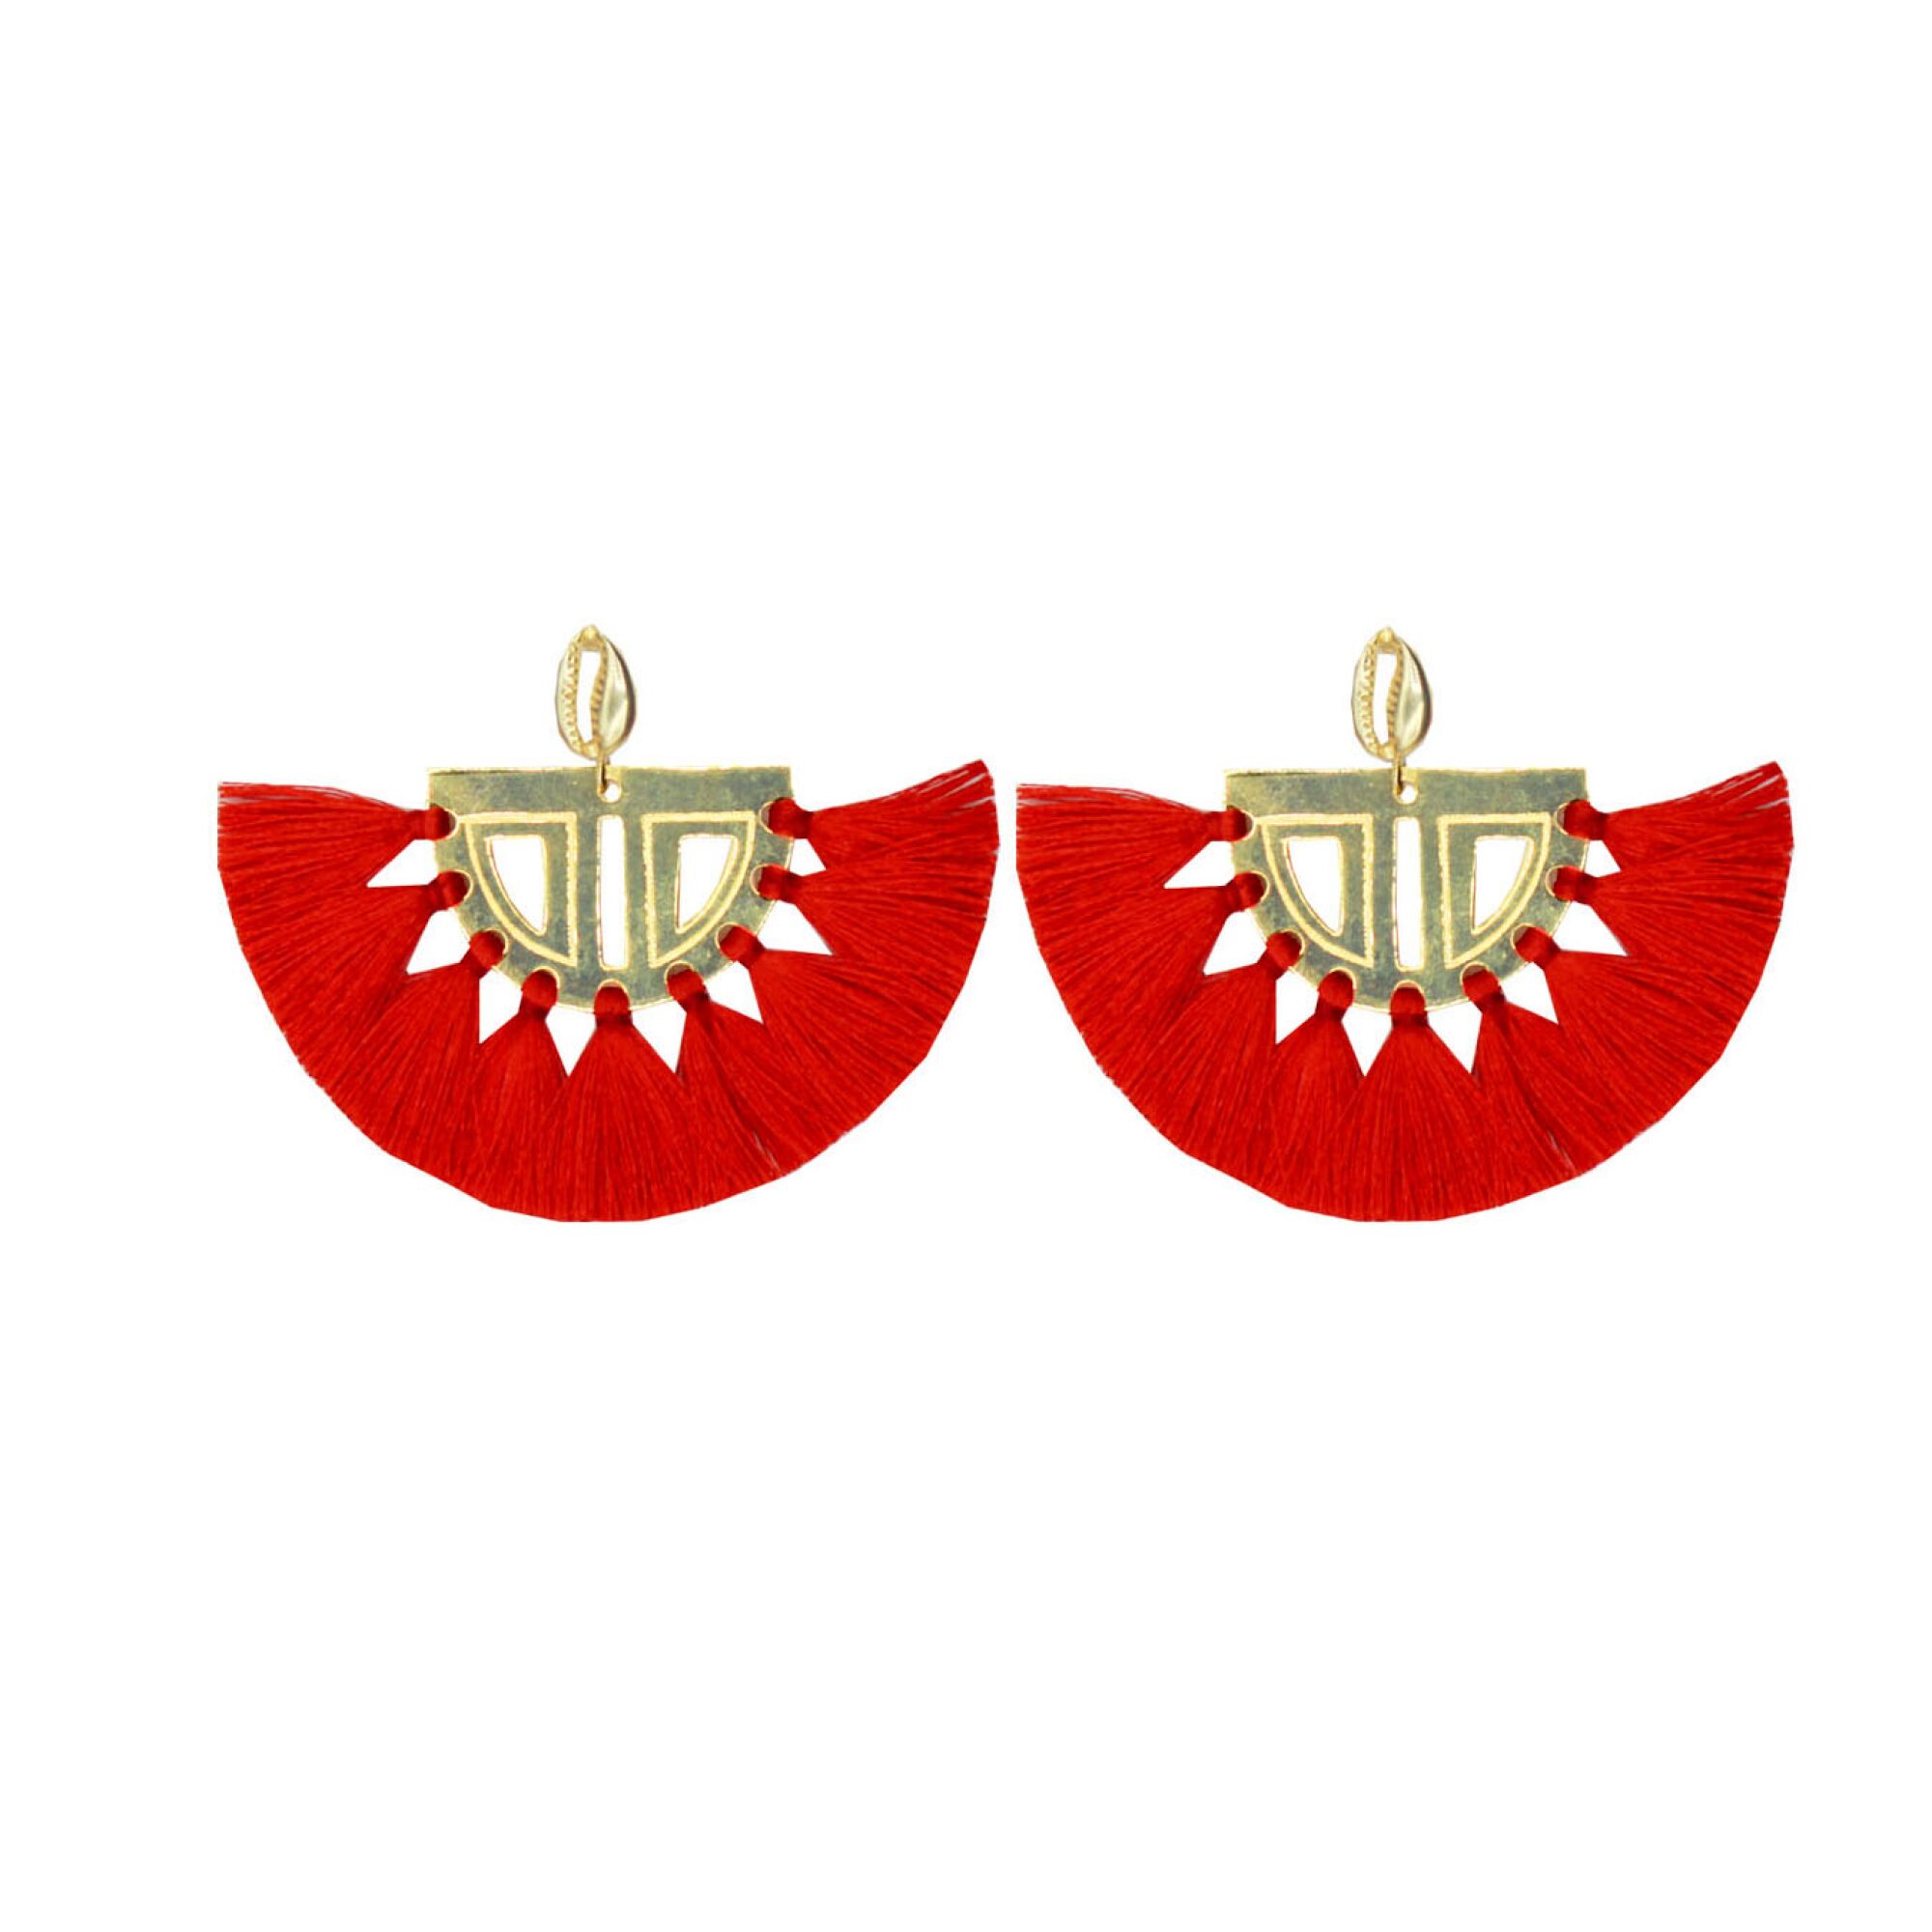 Two golden earrings in semicircular geometric forms feature a fringe made with red thread.